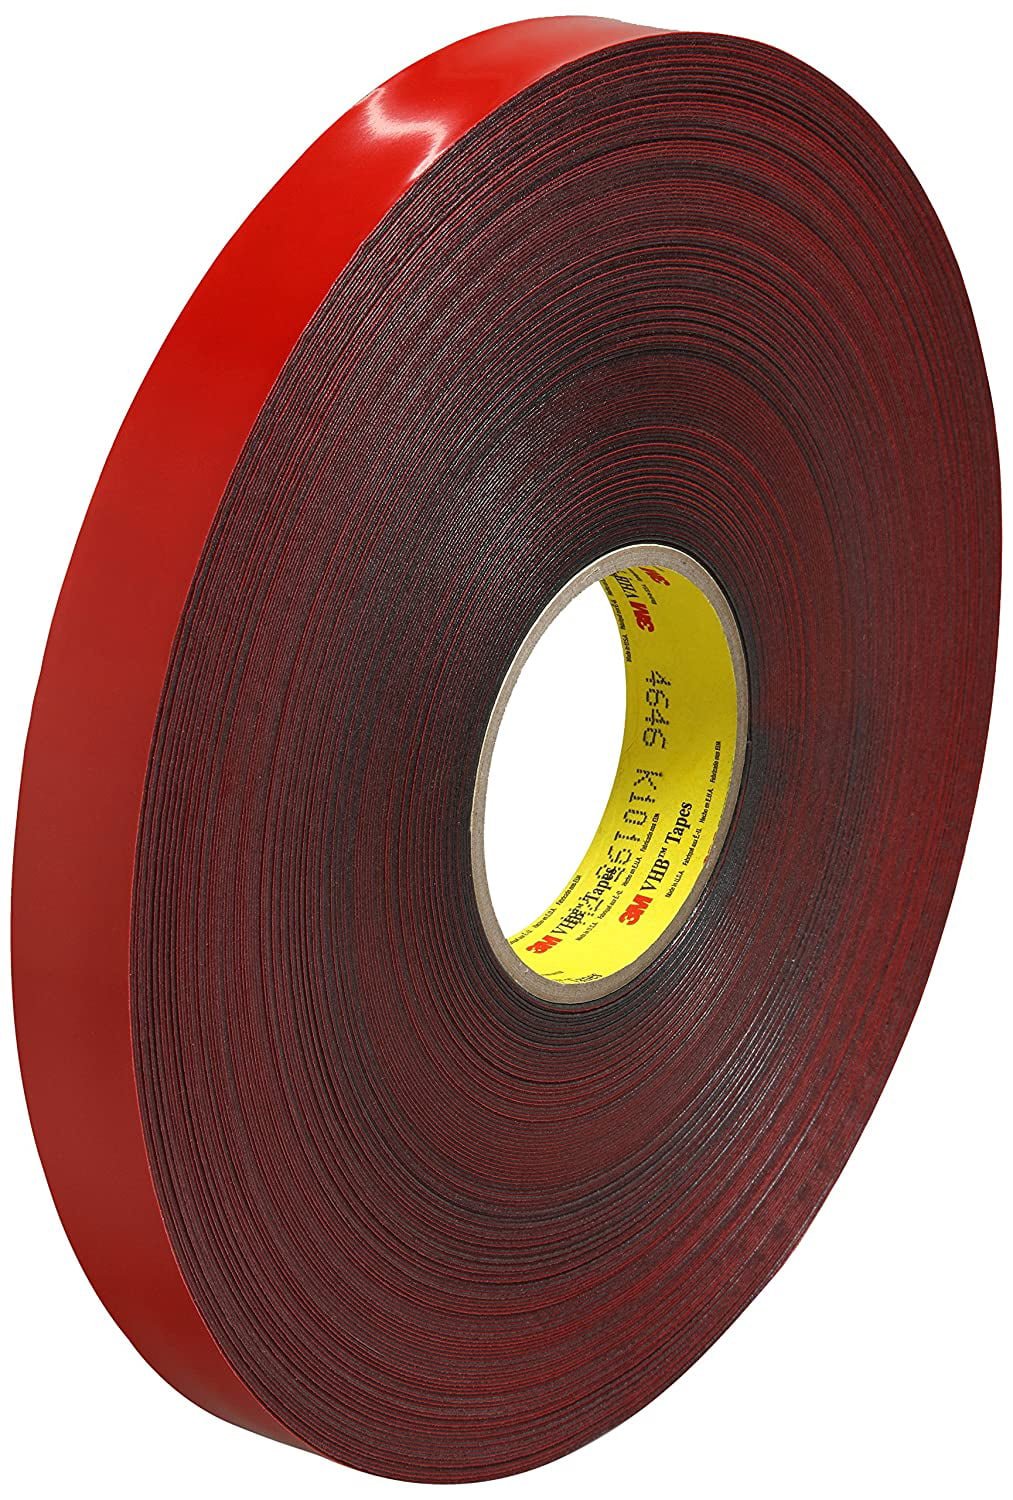 3M SUPER STRONG VHB TAPE / water proof / heavy duty / outdoor